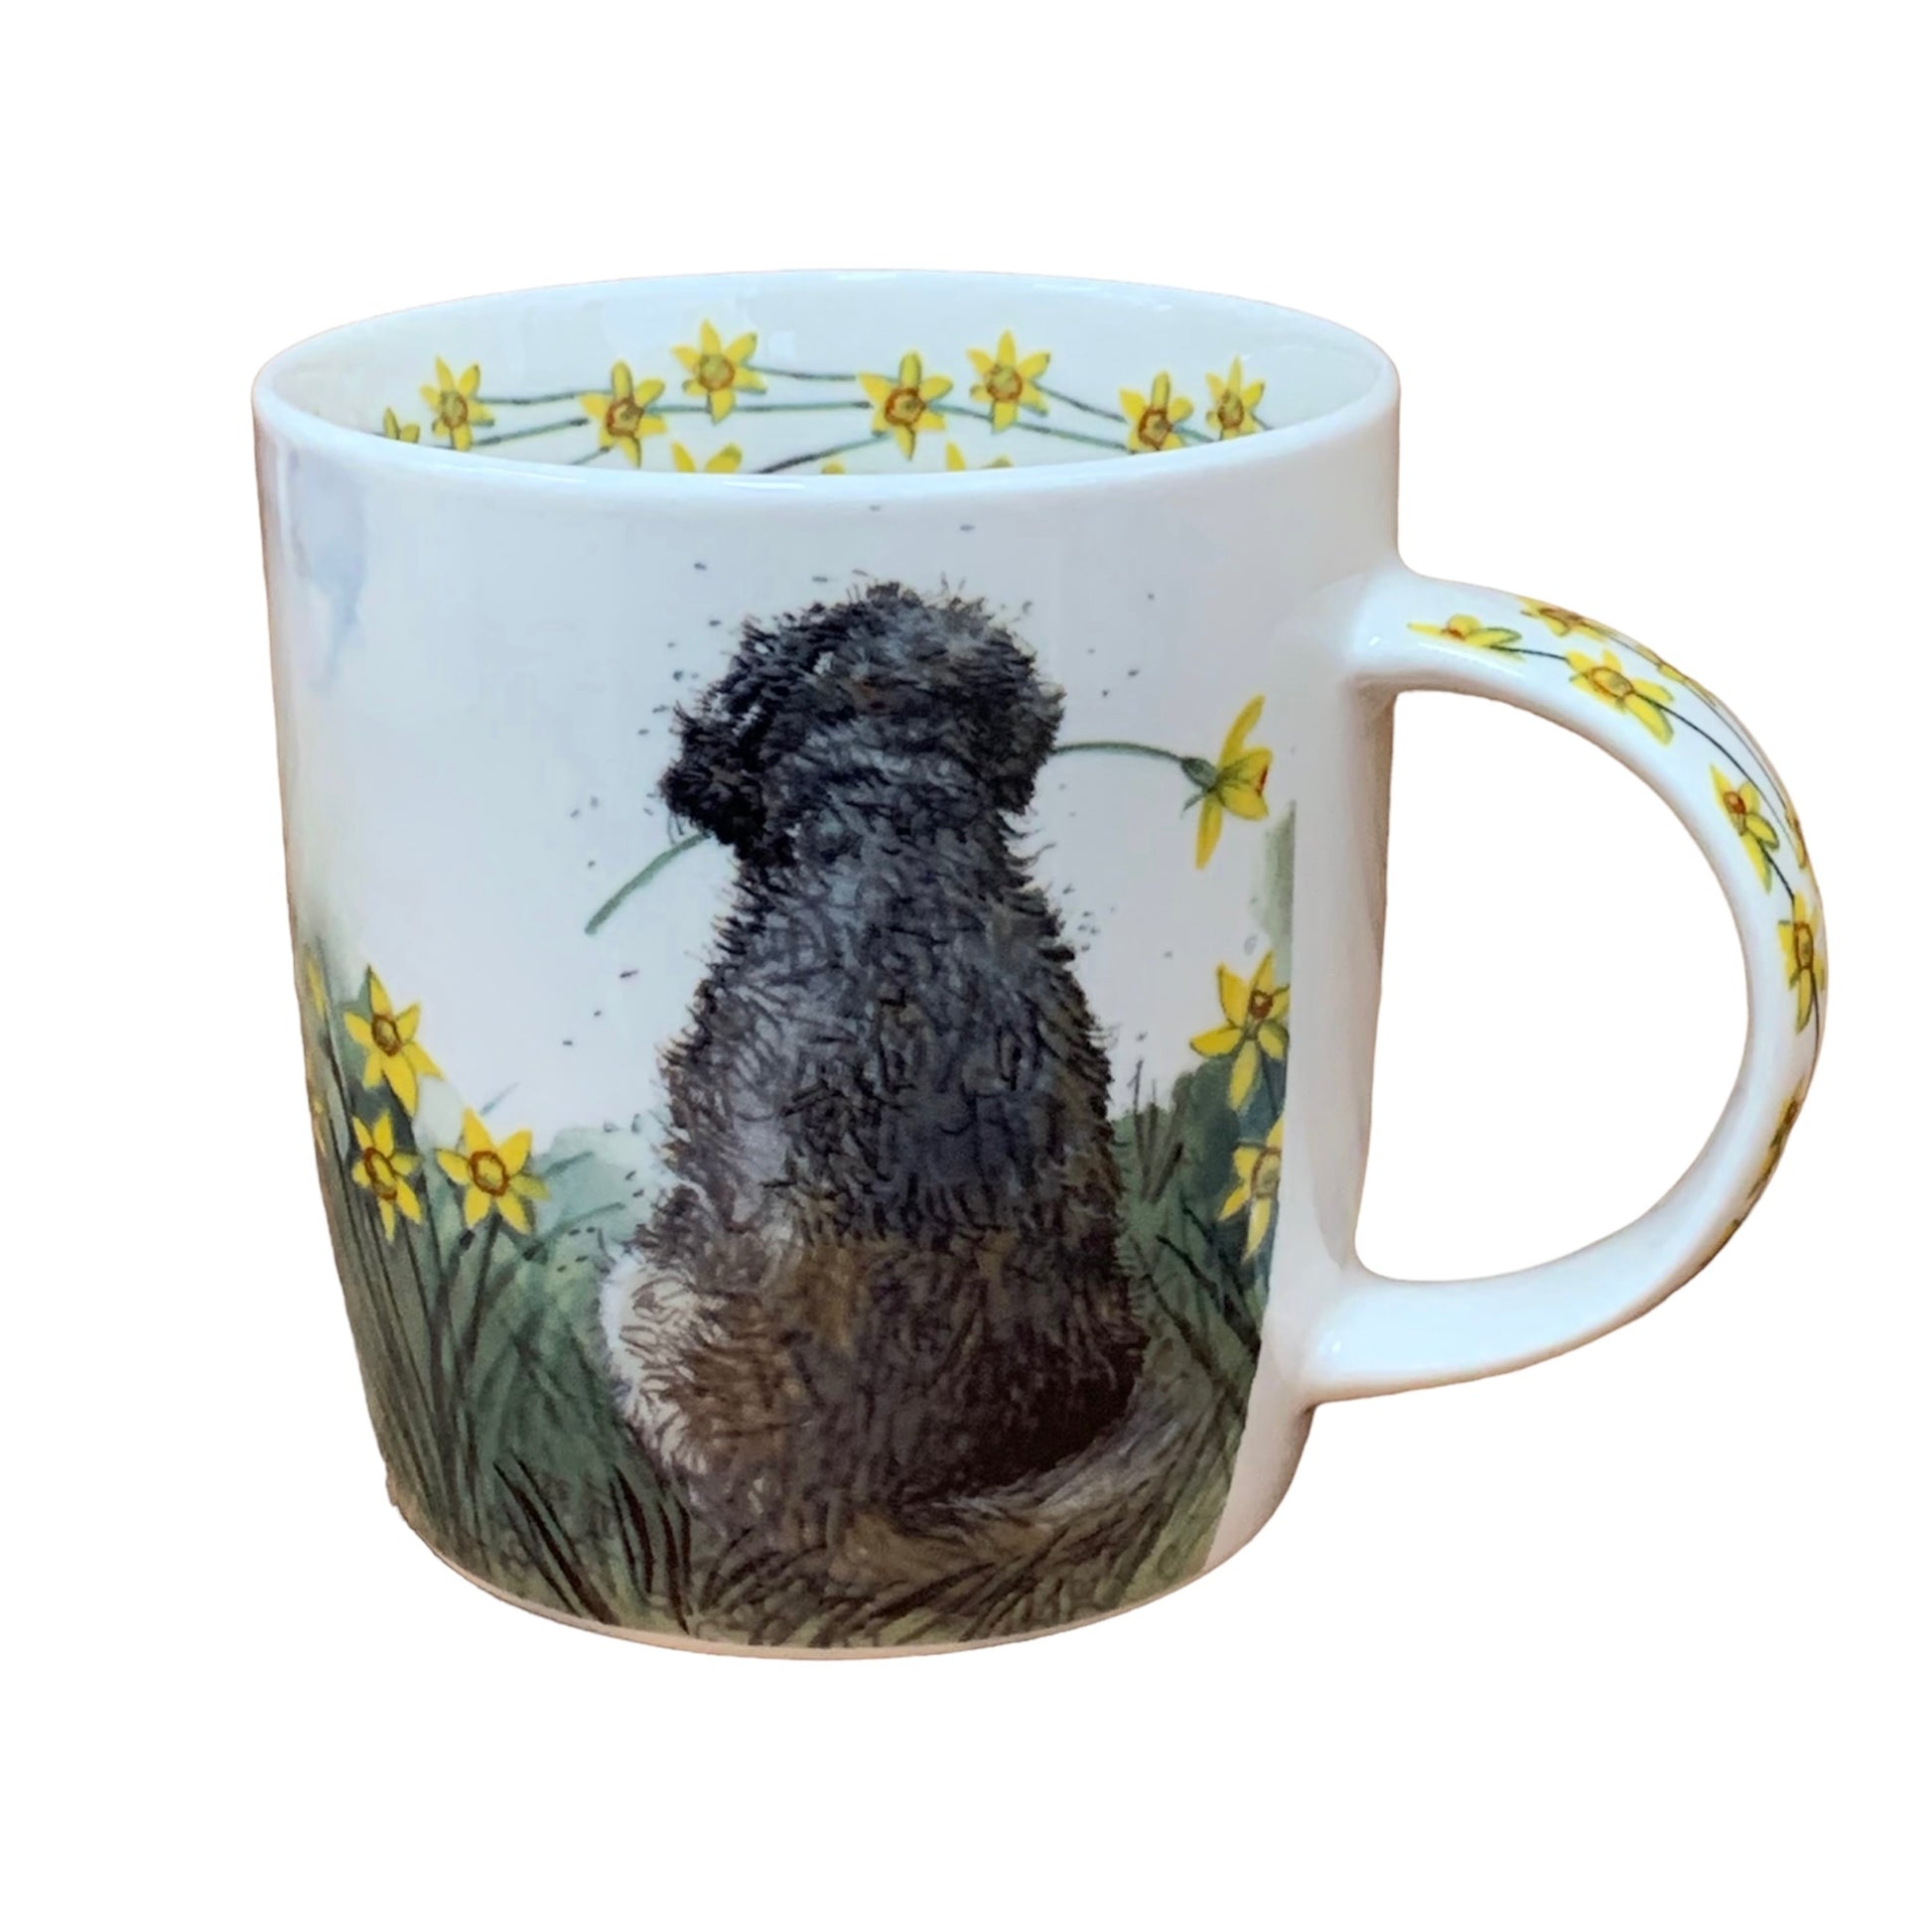 Alex Clark mug is illustrated with a lovely Doodle dog admiring the view & holding a daffodil in its mouth